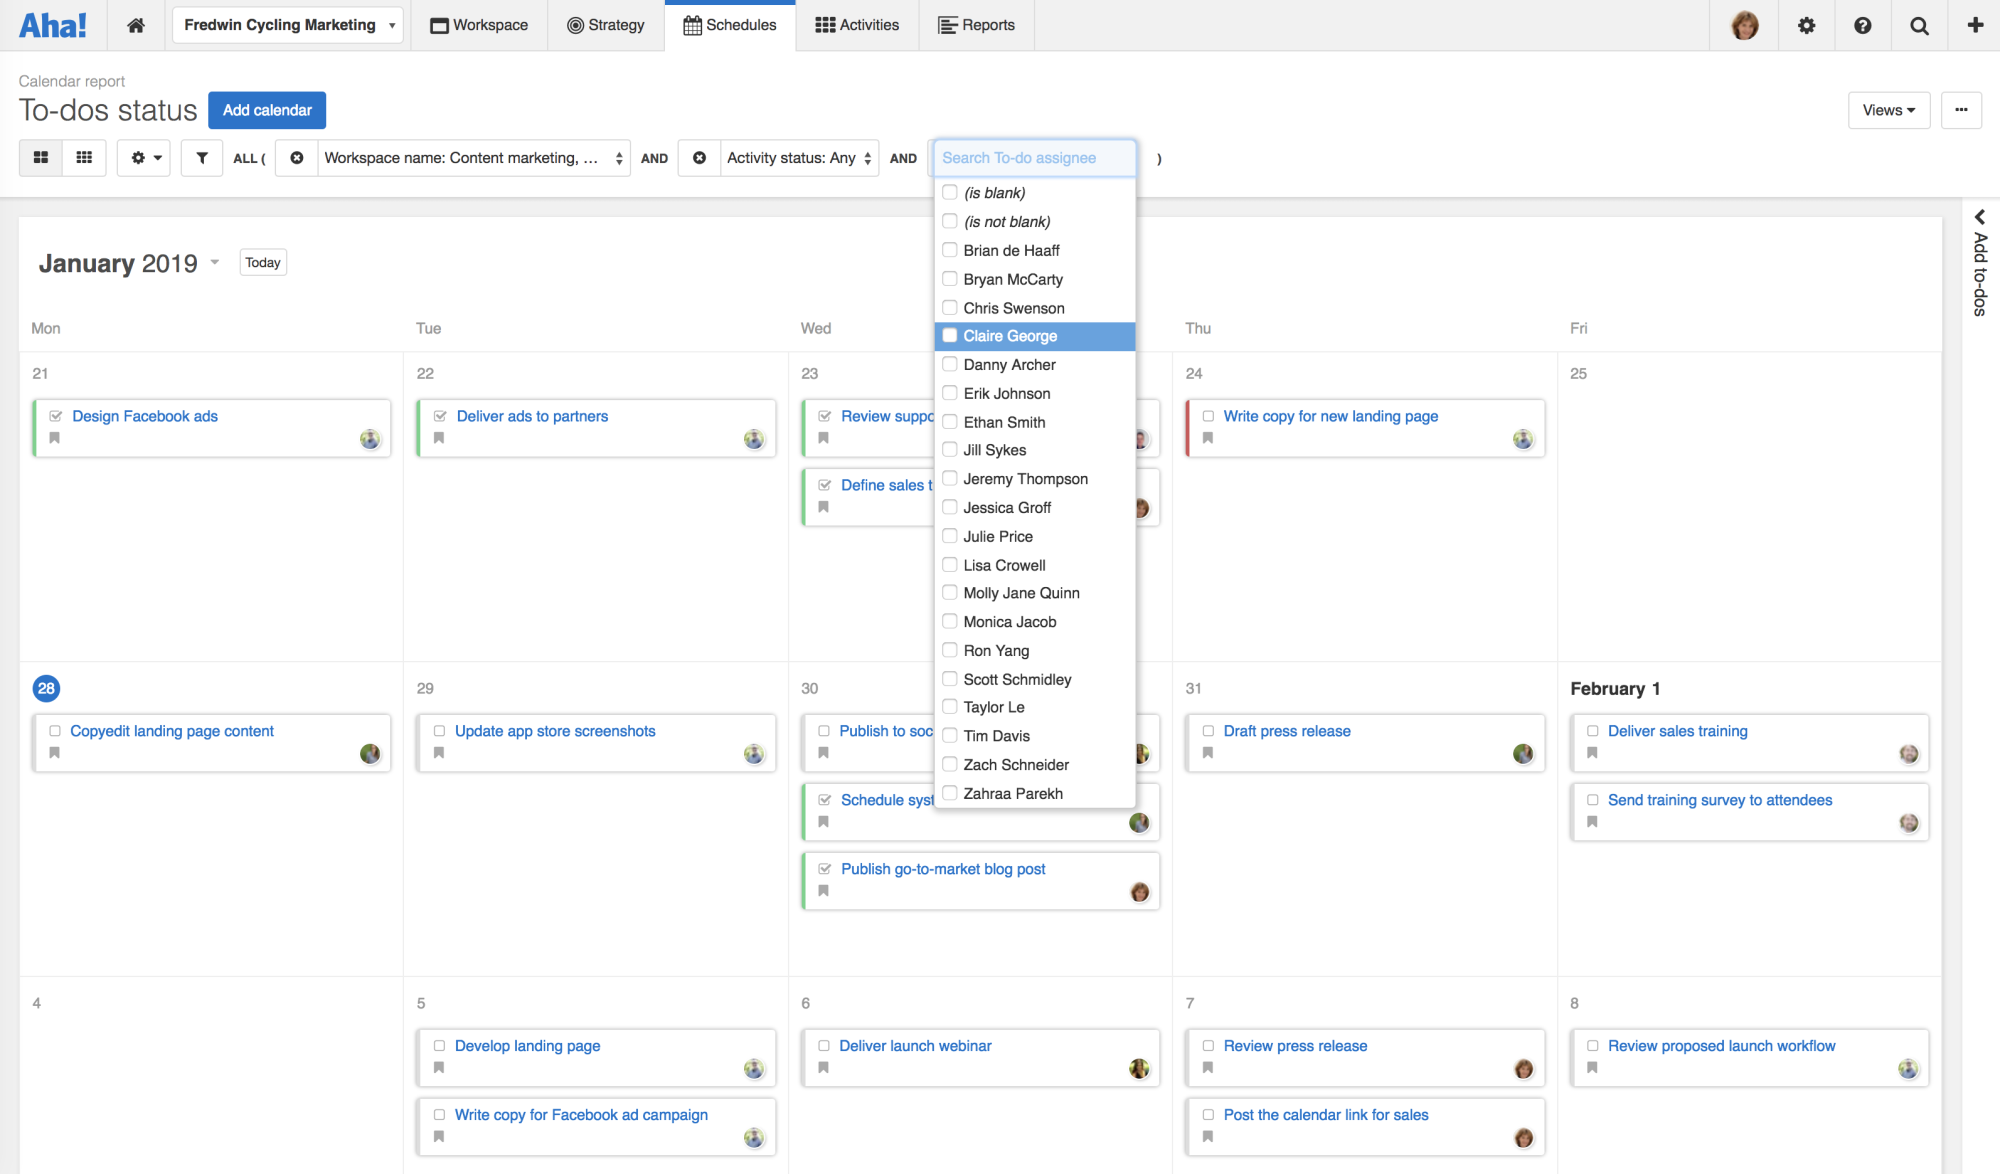 Blog - Just Launched! — Enhanced Calendar to Visualize Activities - inline image